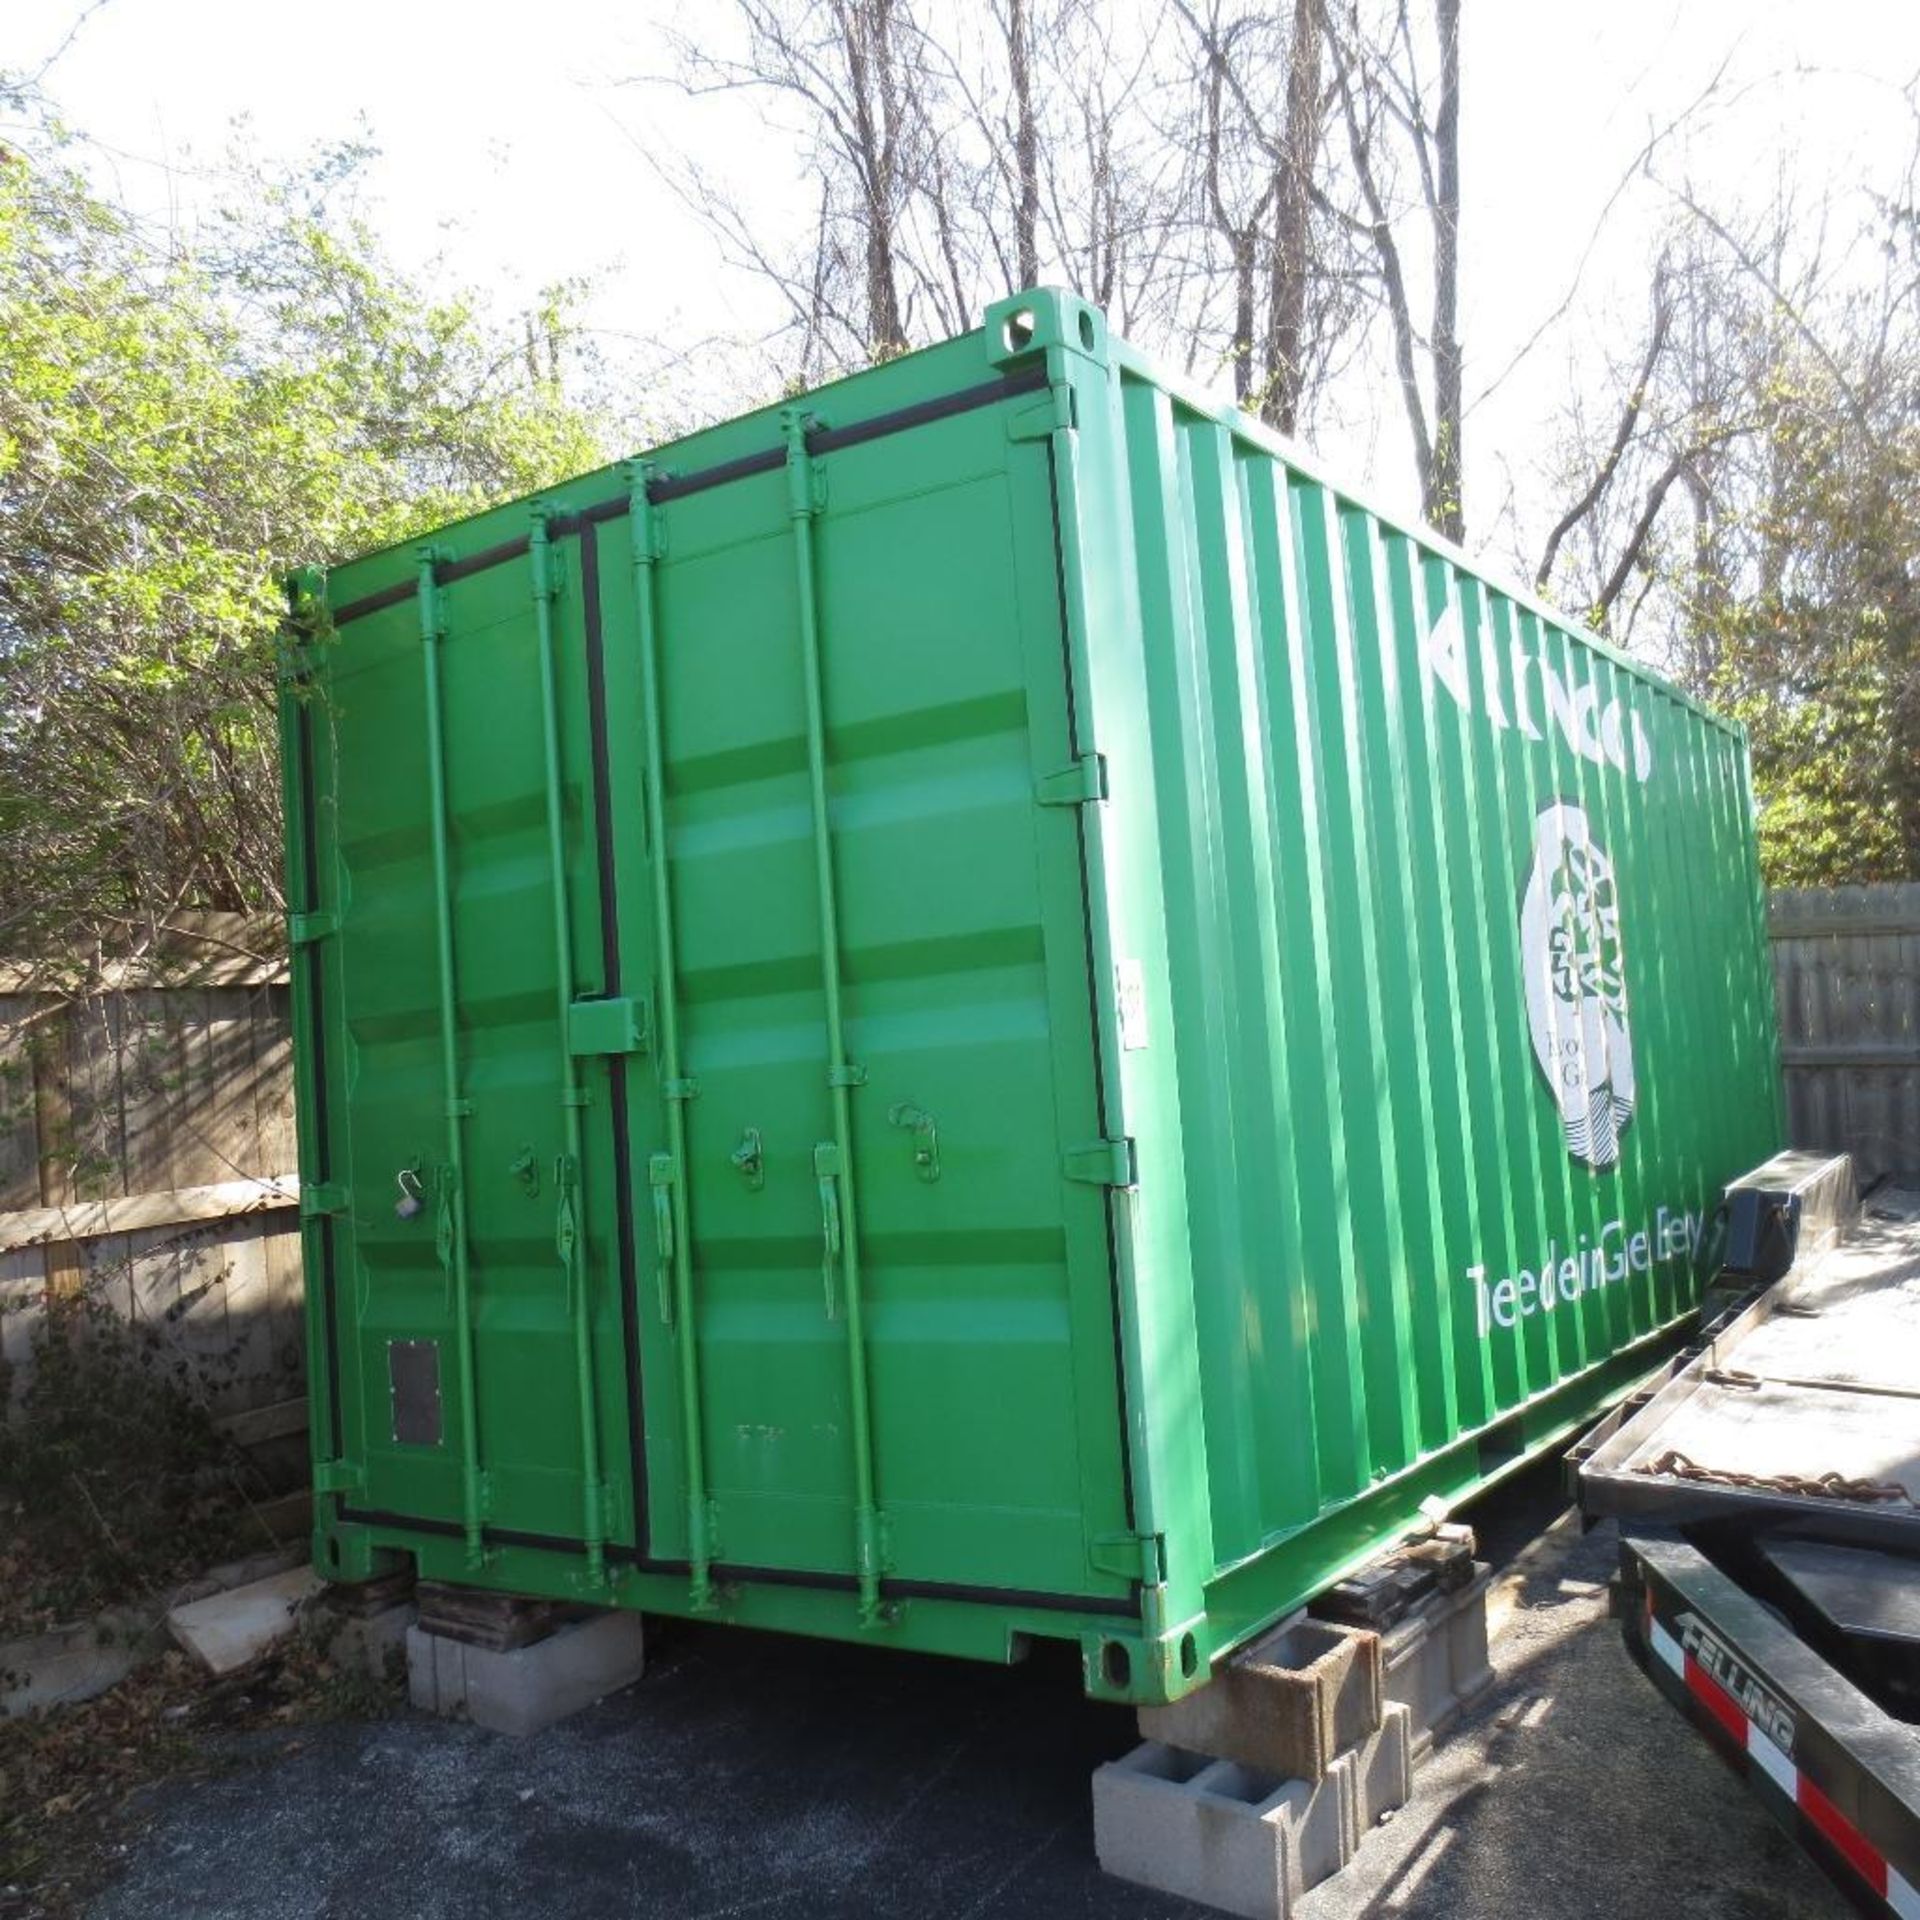 20' Storage Container, Type TYC-113, Late Delivery after noon on 8/11/18; located at 556 Leffingwell